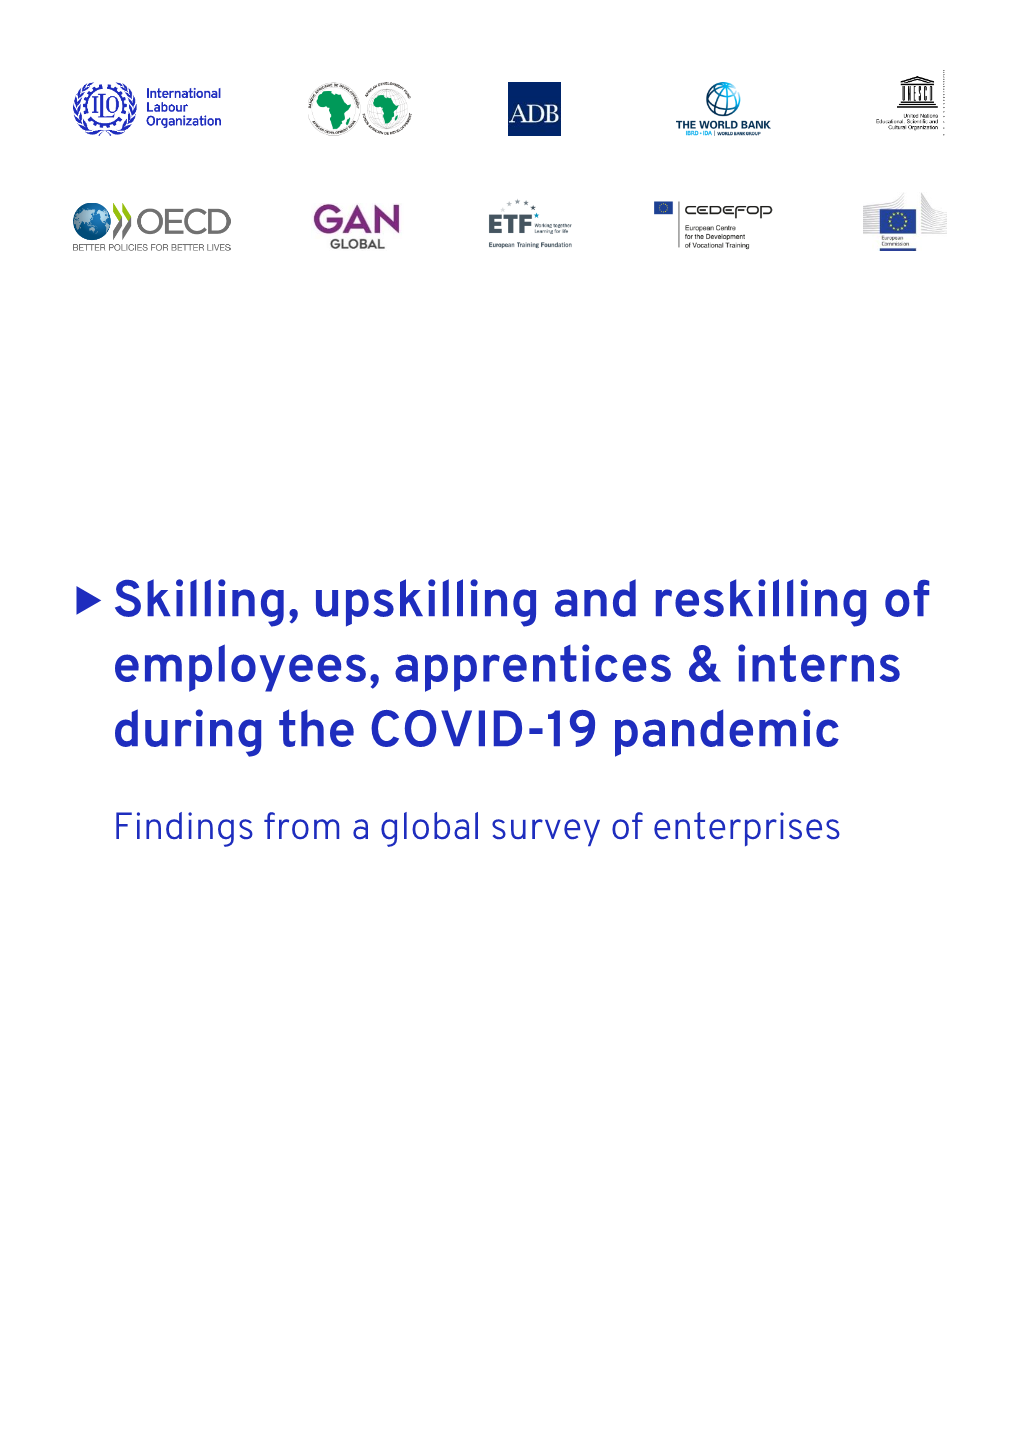 Employees, Apprentices & Interns During the COVID-19 Pandemic